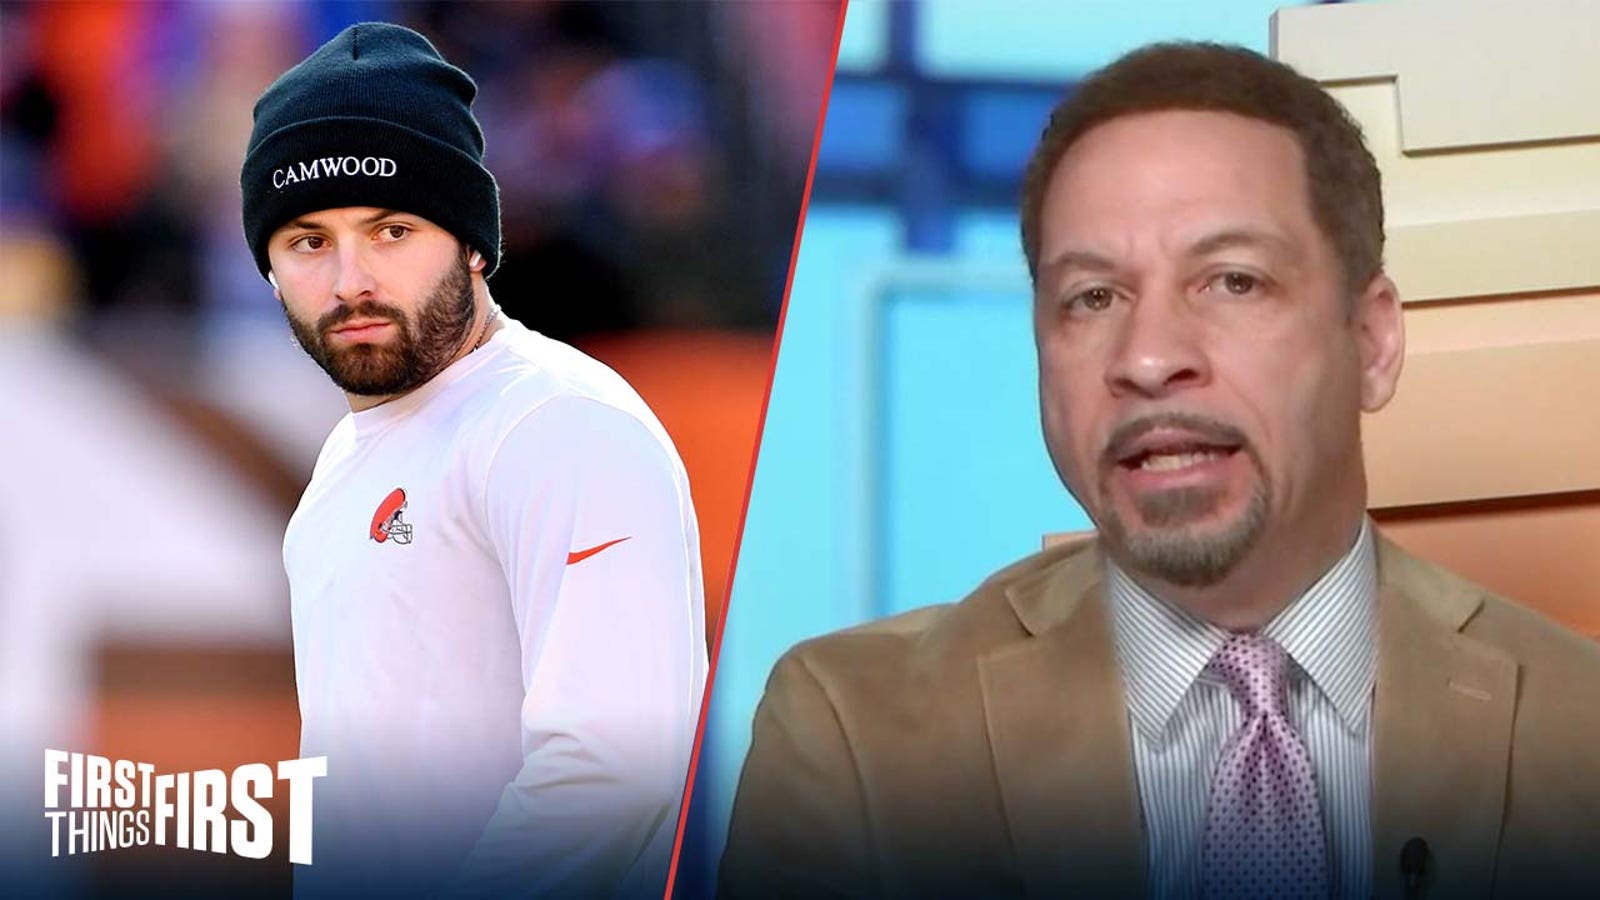 Chris Broussard: This Cleveland Browns' season has been a real nightmare